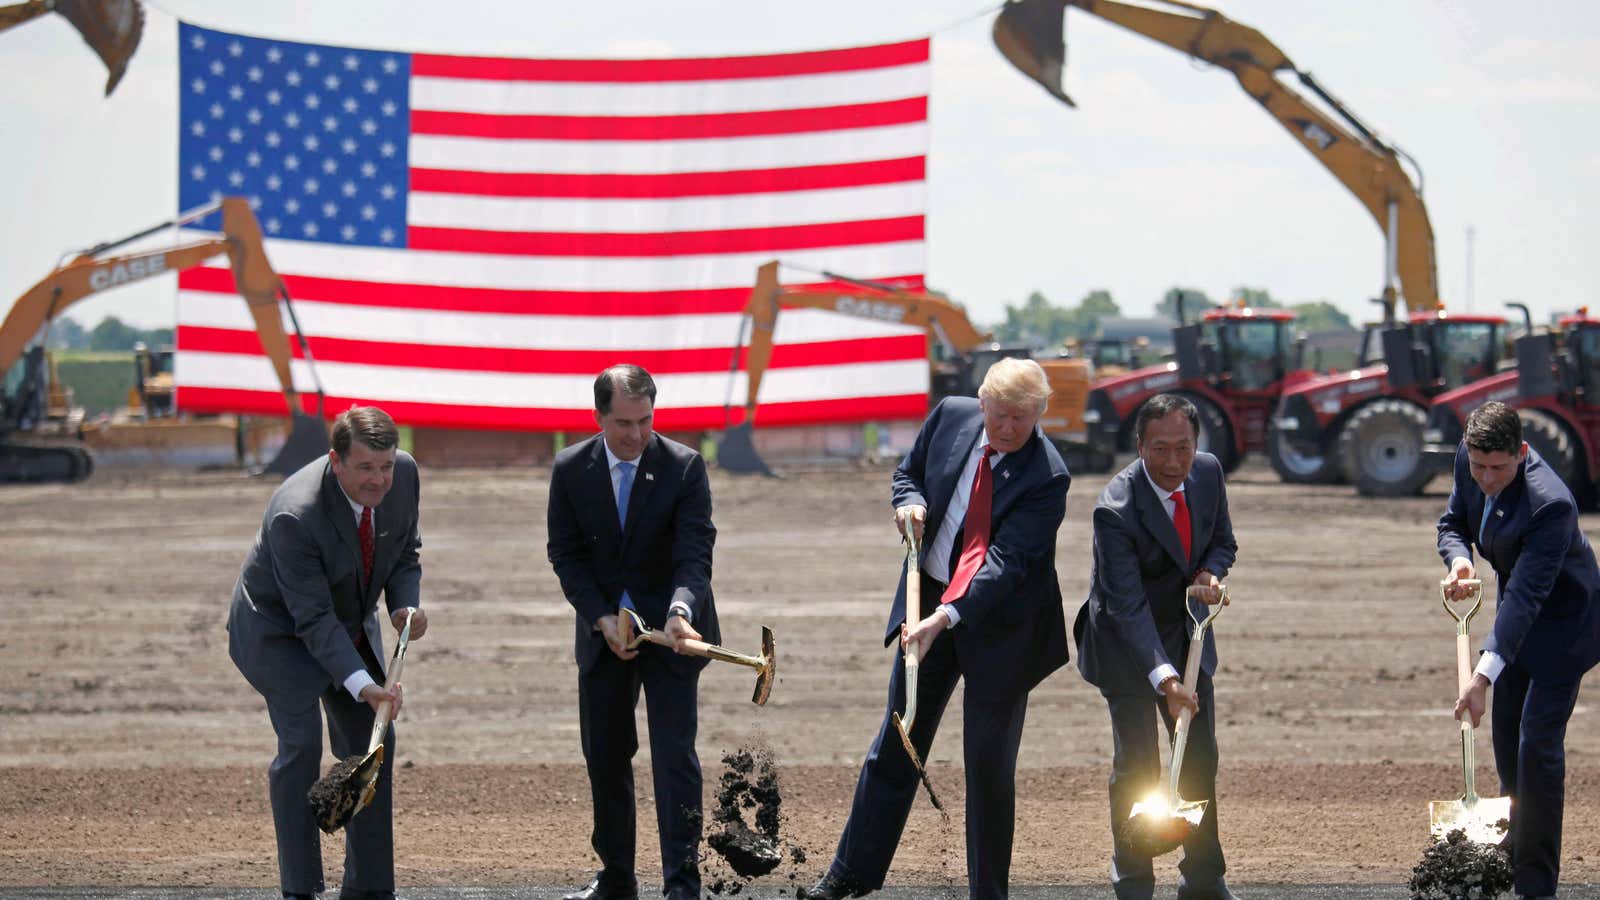 Breaking ground with a golden shovel.